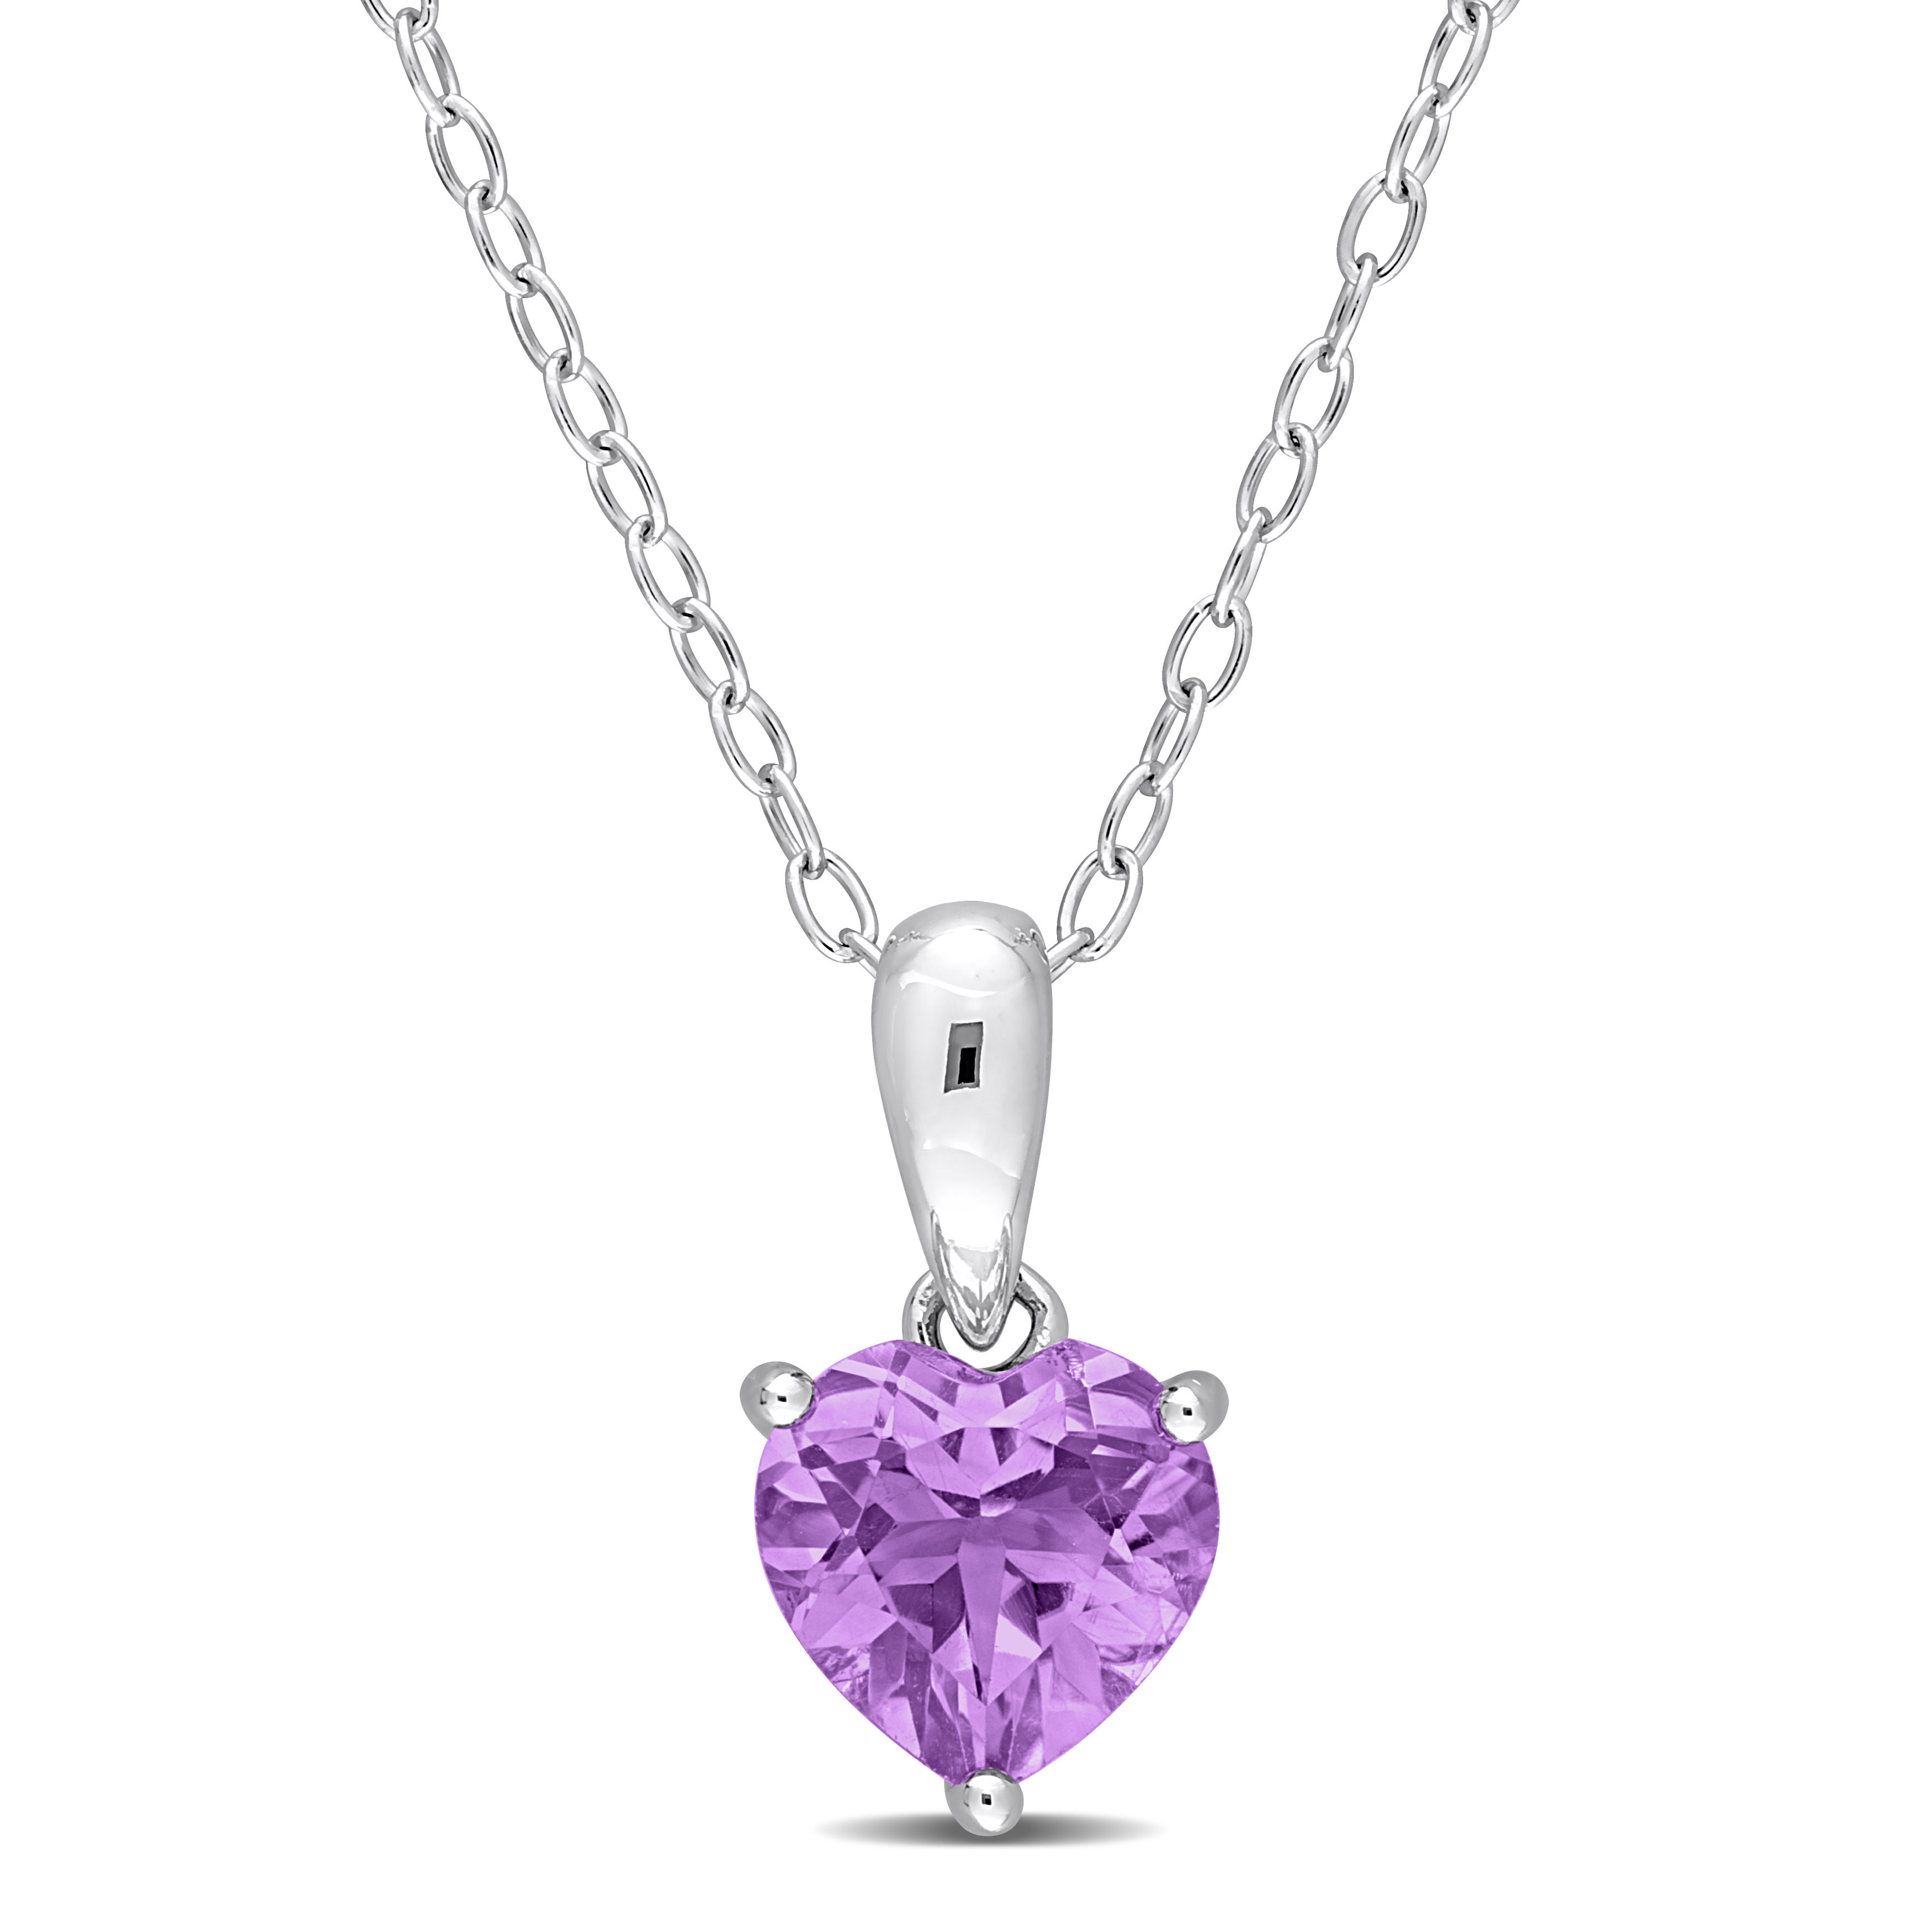 3/4 CT TGW Heart Shape Amethyst Solitaire Heart Design Pendant with Chain in Sterling Silver - 18 in.